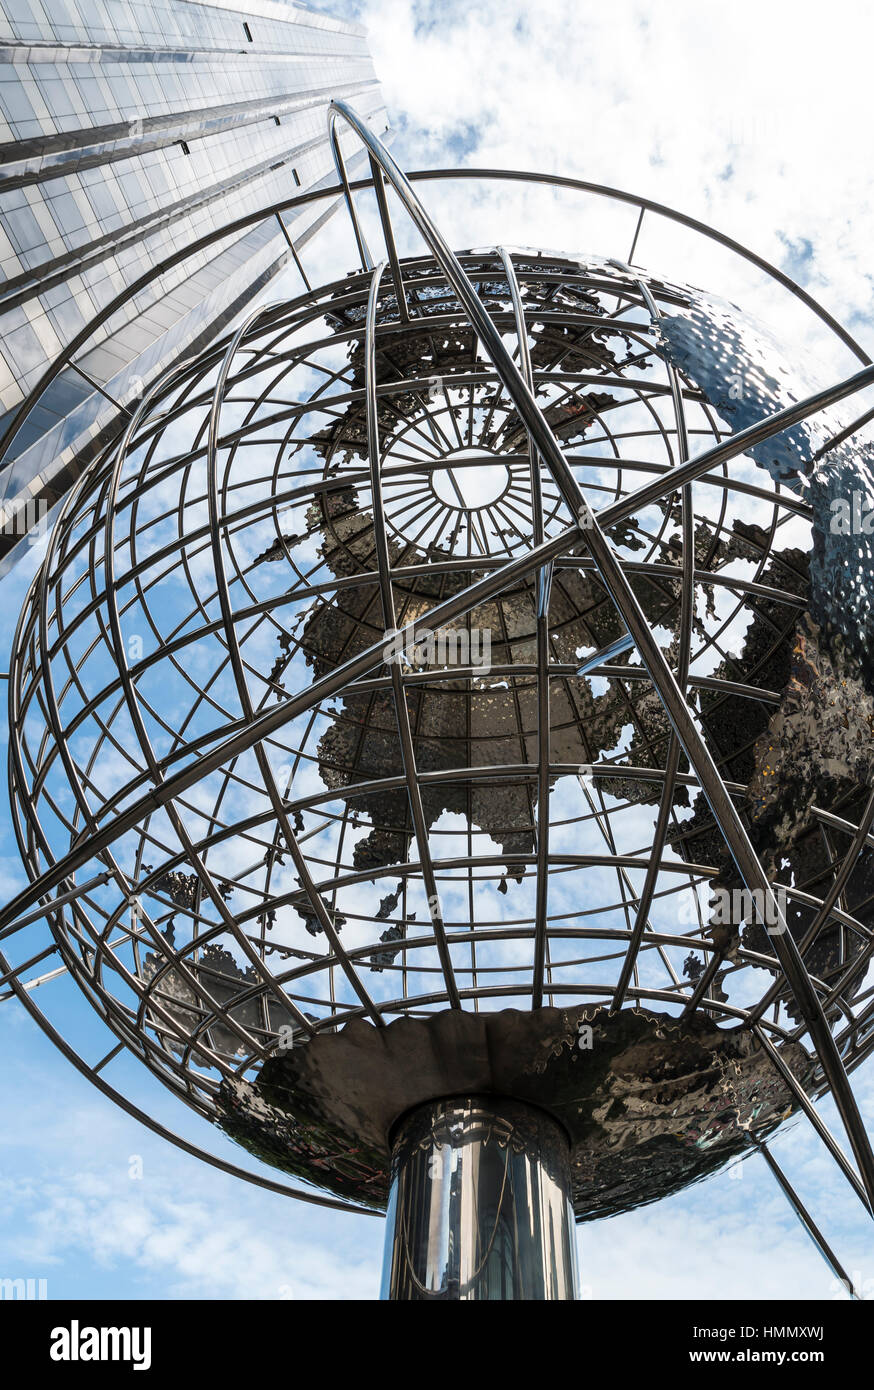 Looking upwards at the Trump International Hotel and Tower and steel unisphere globe at Columbus Circle, New York, USA Stock Photo